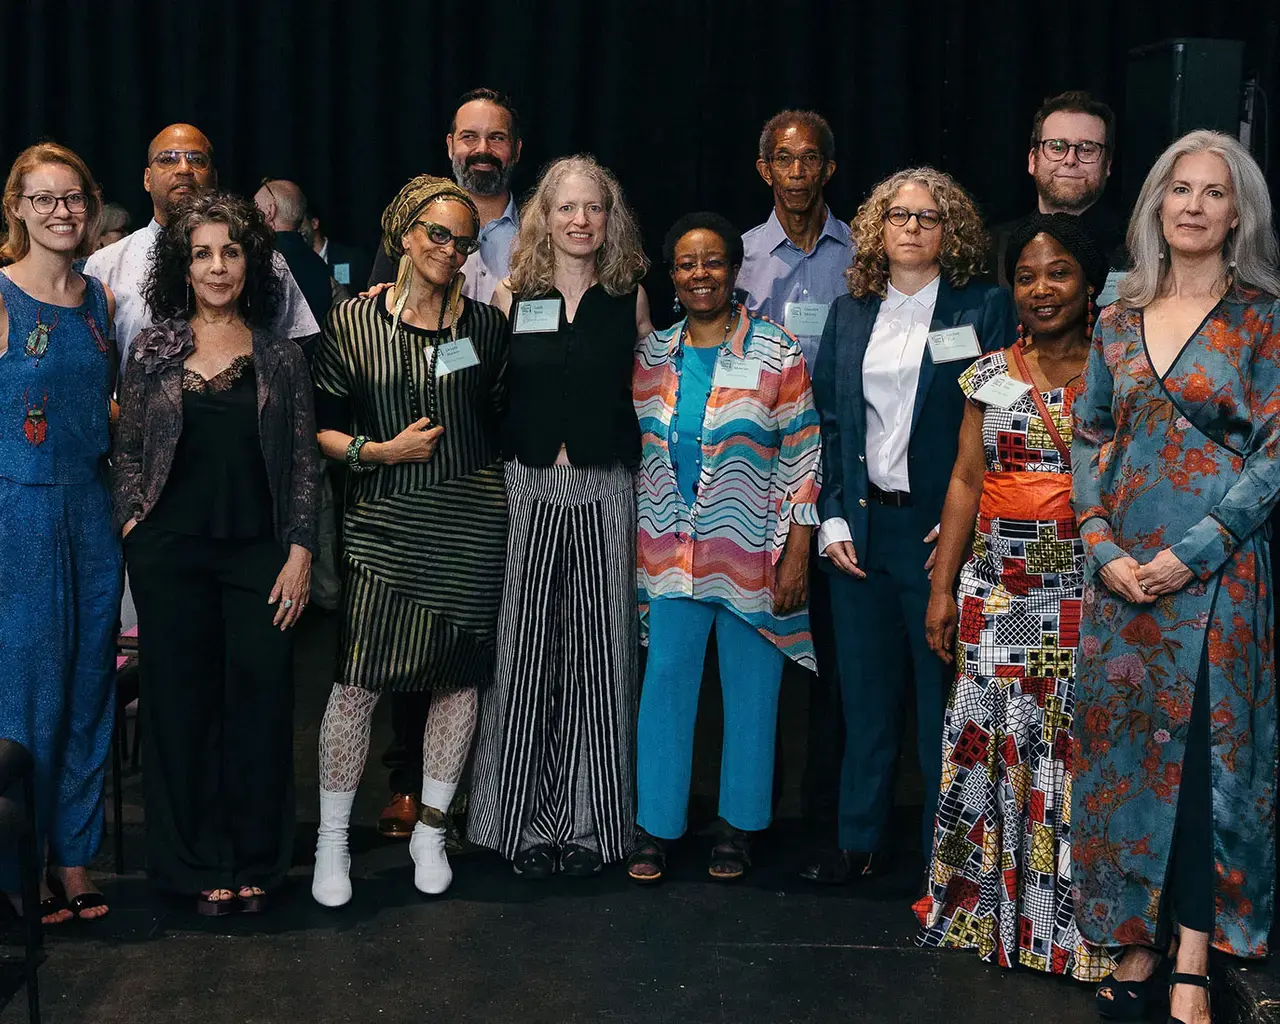 2018 Pew Fellows. From left to right: Ellie Clark of The Pew Center for Arts &amp; Heritage; David Hartt; Paula Marincola, Executive Director, The Pew Center for Arts &amp; Heritage; Ursula Rucker; Alex Torra; Leah Stein; Diane Monroe; Quentin Morris; Rachel Zolf; Zaye Tete; David Ludwig; Melissa Franklin, Director, Pew Fellowships. Not pictured: 2018 Fellows Jonathan Olshefski, Ken Lum, Michele Angela Ortiz. Photo by Sabina Sister.